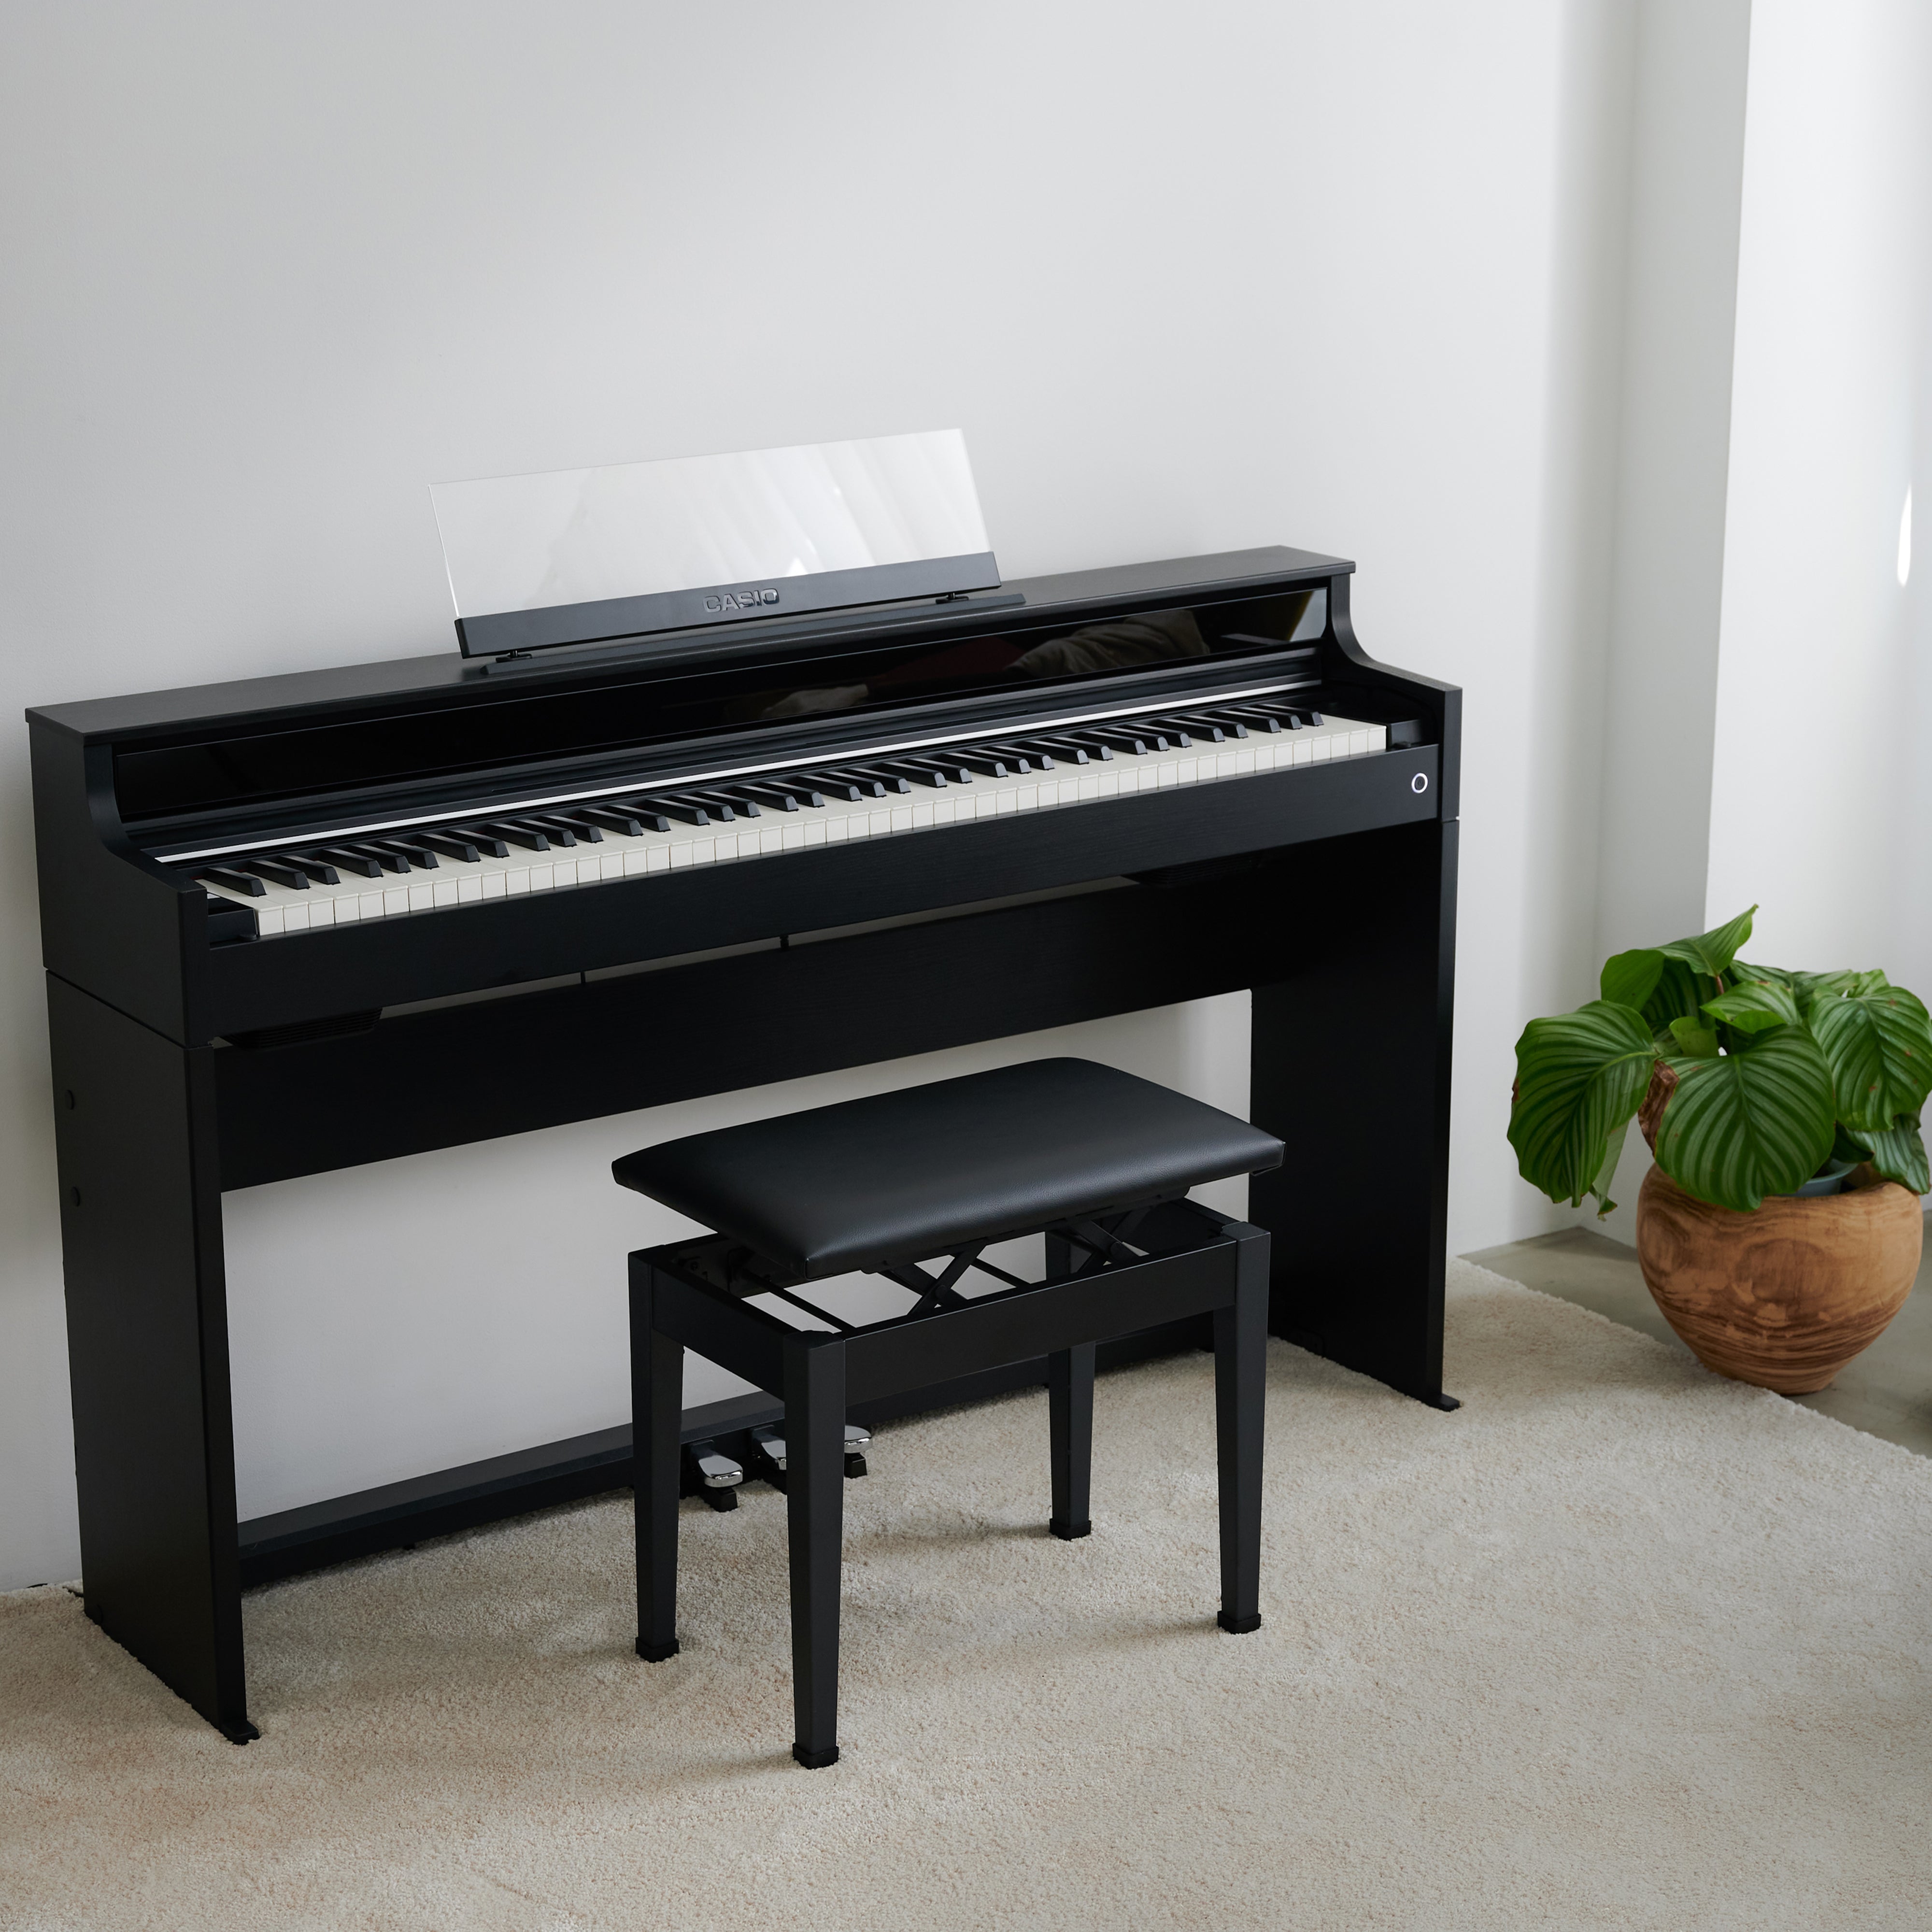 Casio Celviano AP-S450 Digital Piano - Black - facing right in a stylish living space